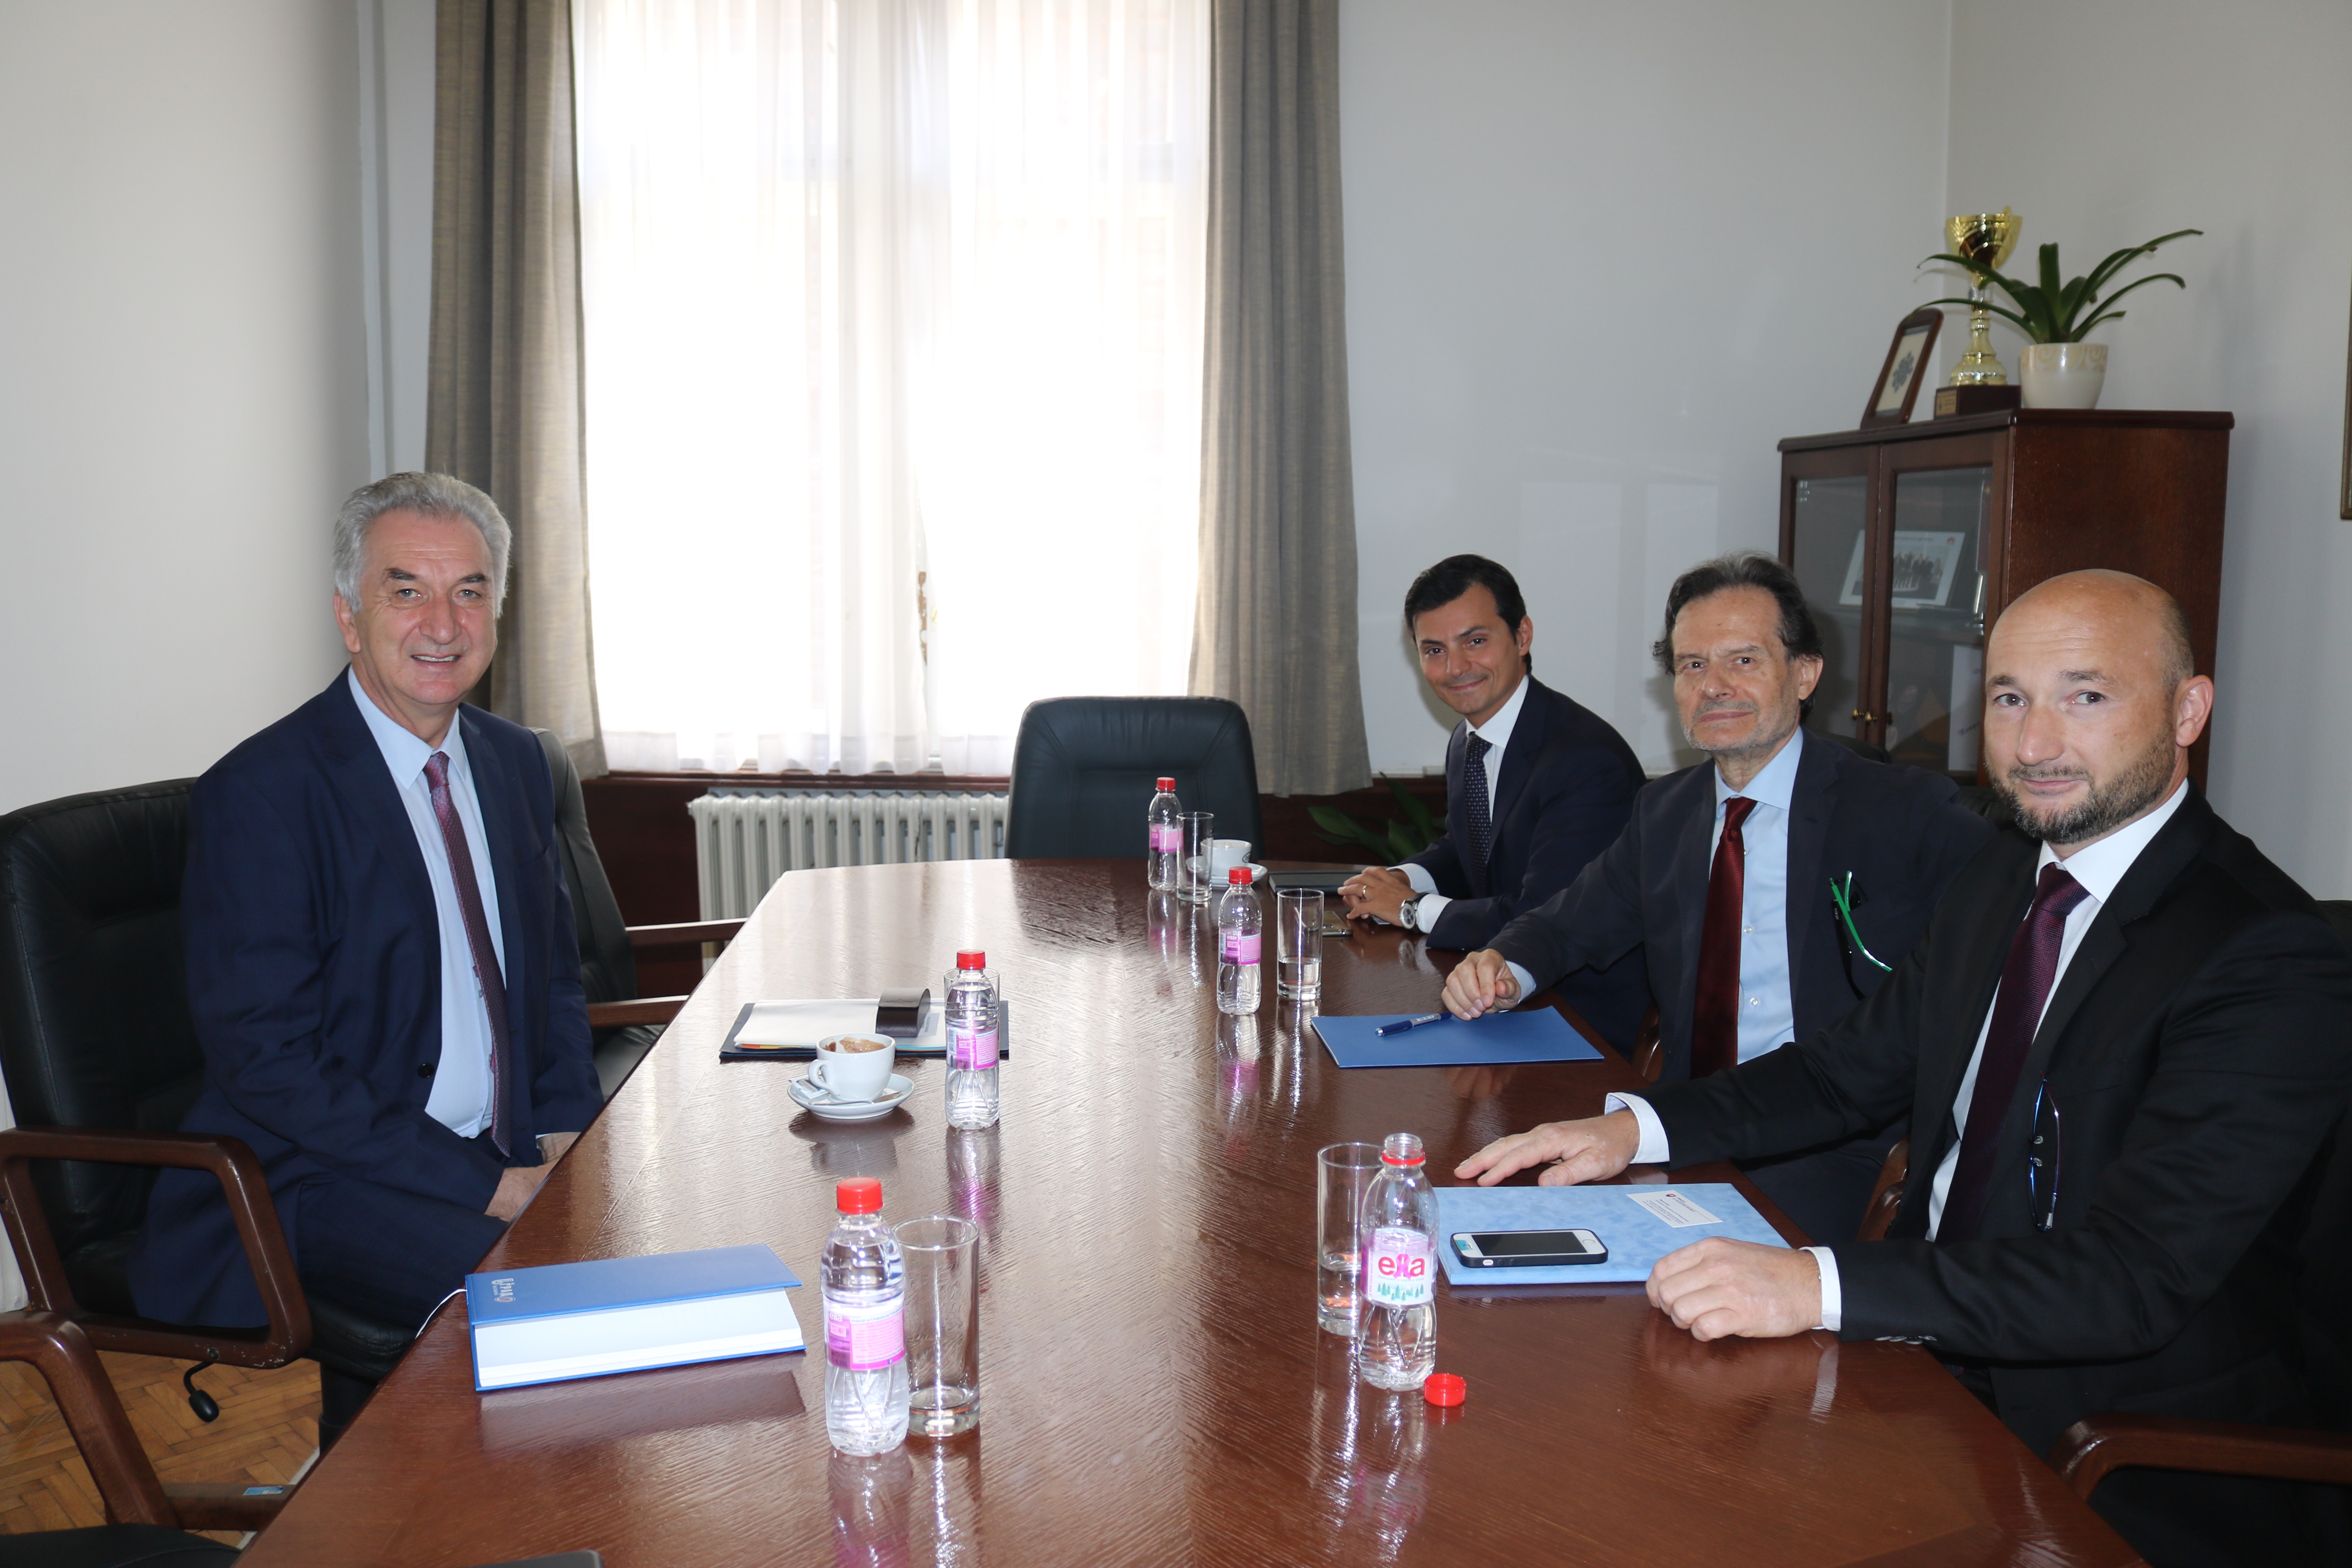 Picture for AMBASSADORS OF SPAIN, ITALY AND SLOVAKIA WITH MINISTER ŠAROVIĆ: DURING MANDATE OF MINISTER ŠAROVIĆ IMPORTANT STRATEGIC PACKAGE ROUNDED UP FOR DEVELOPMENT OF COUNTRY